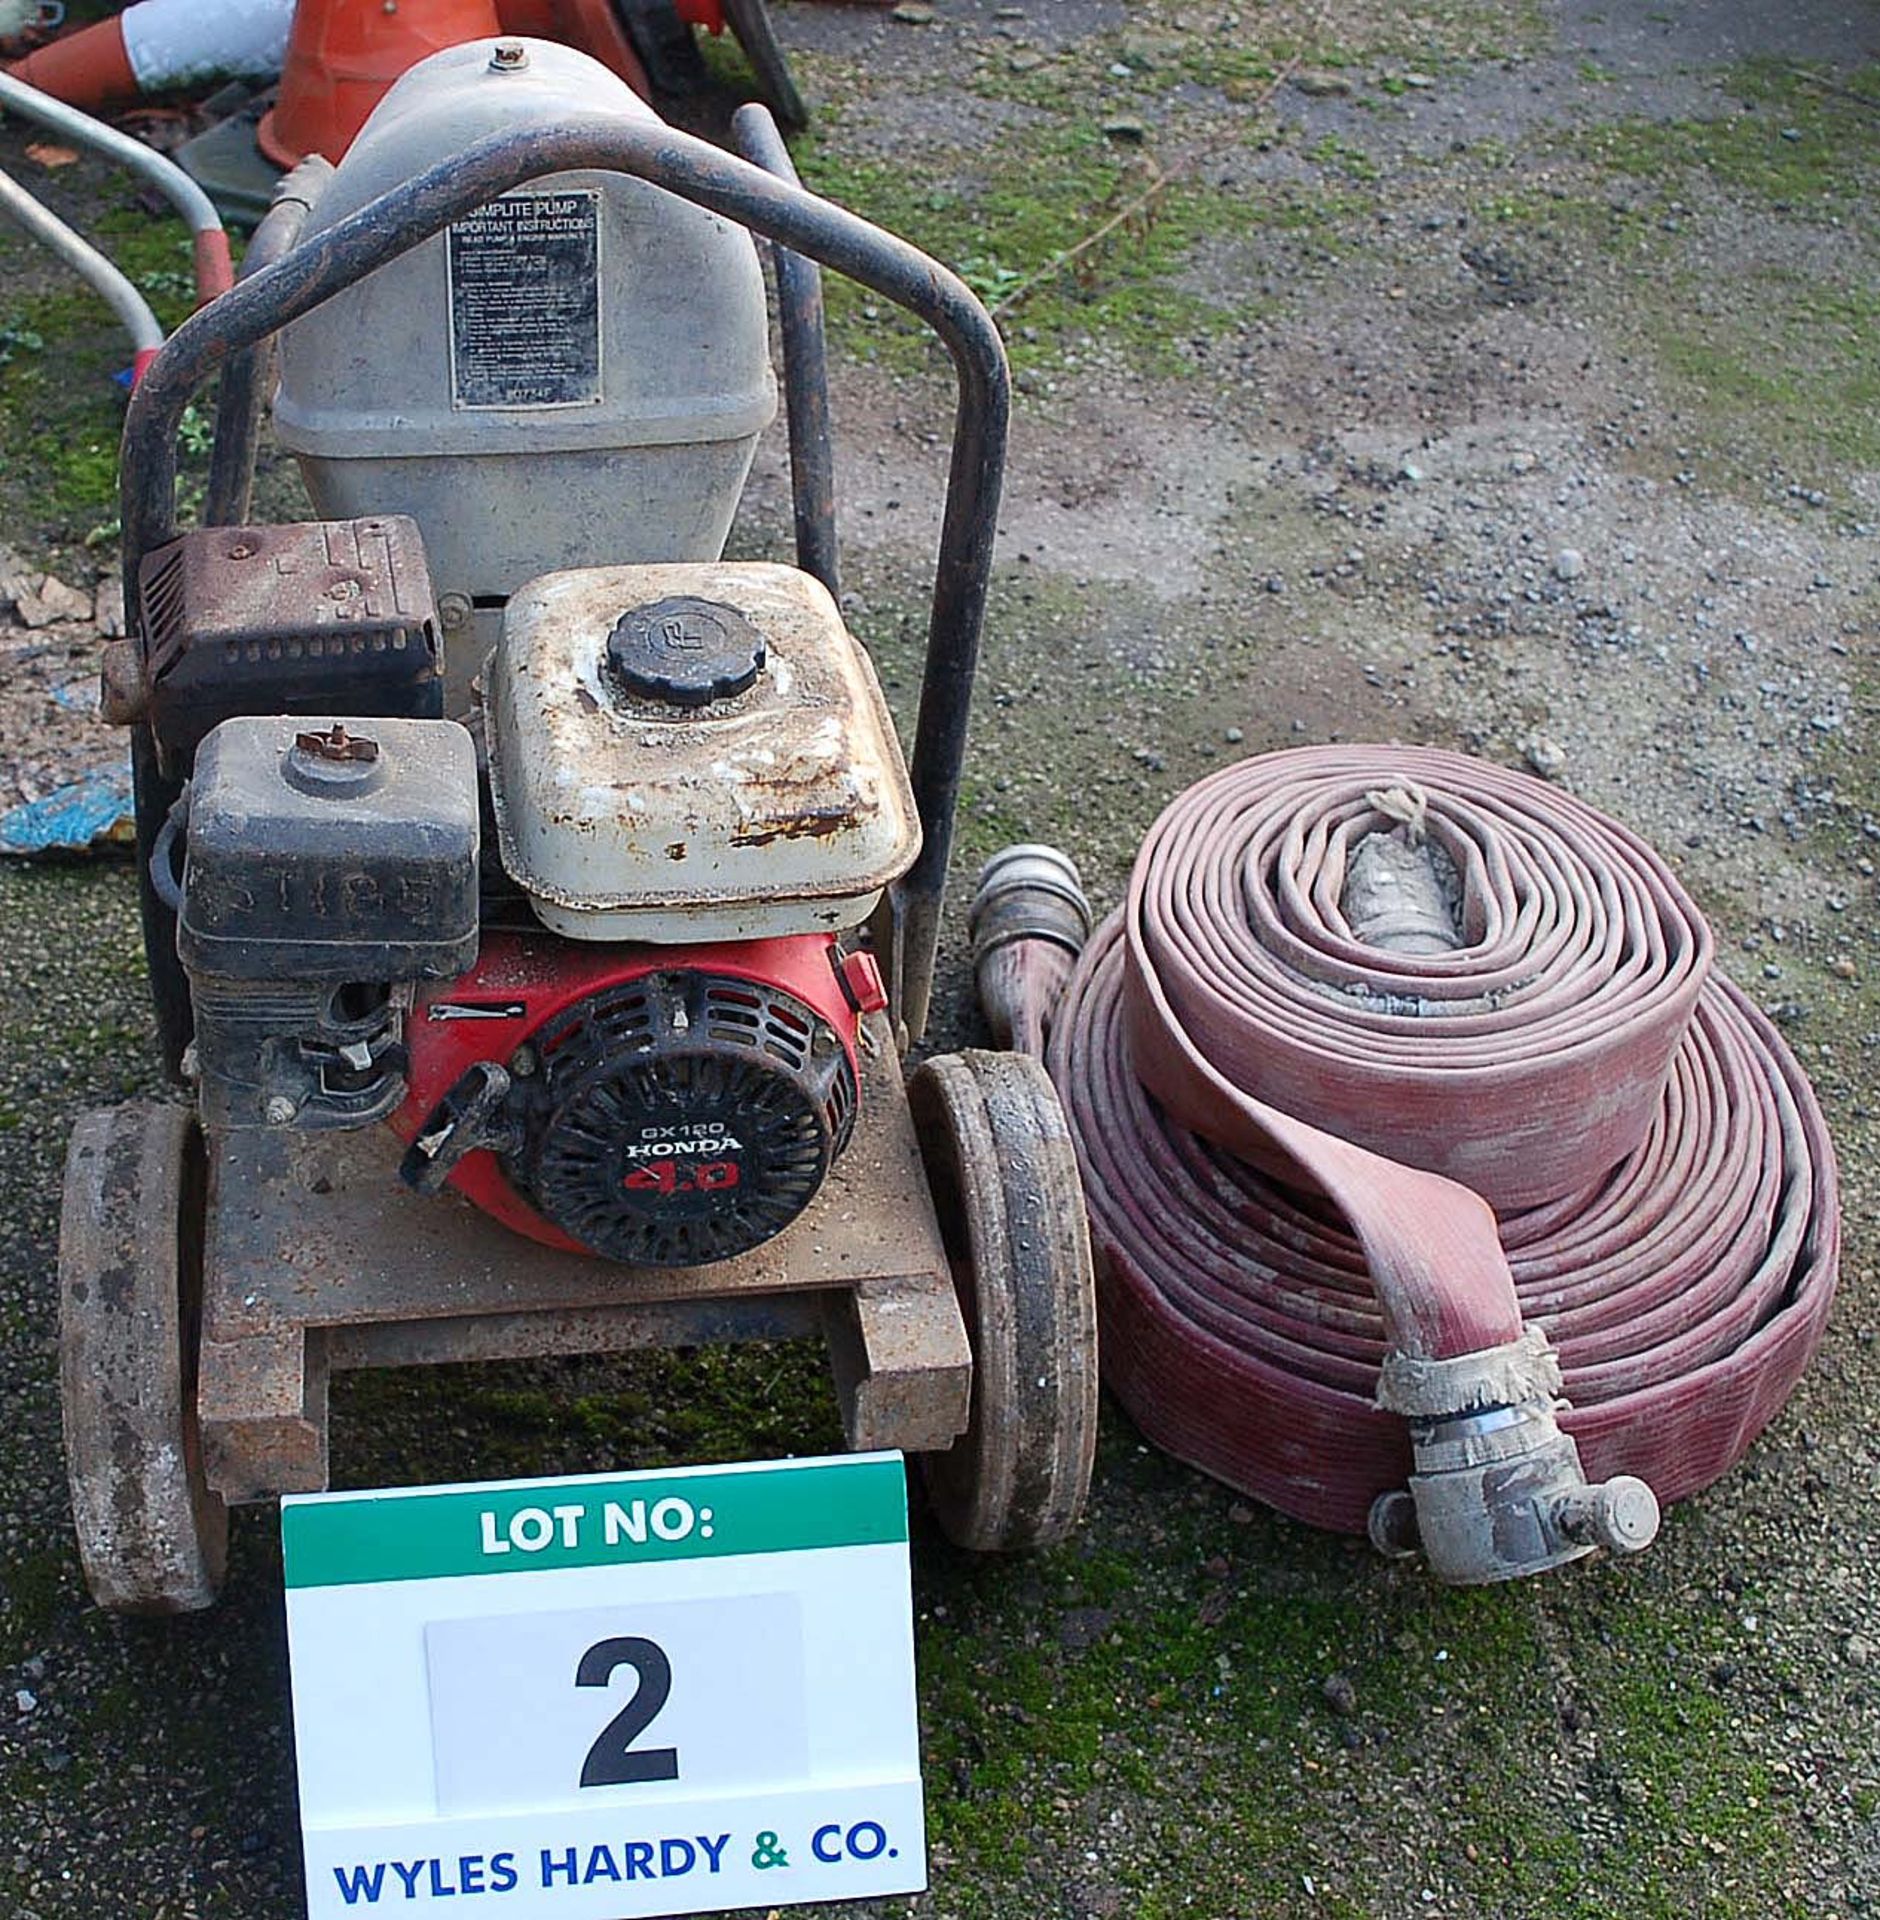 A SELWOOD SIMPLITE Portable Petrol Powered Water Pump Serial Number: 80734F with 2 Hoses - as